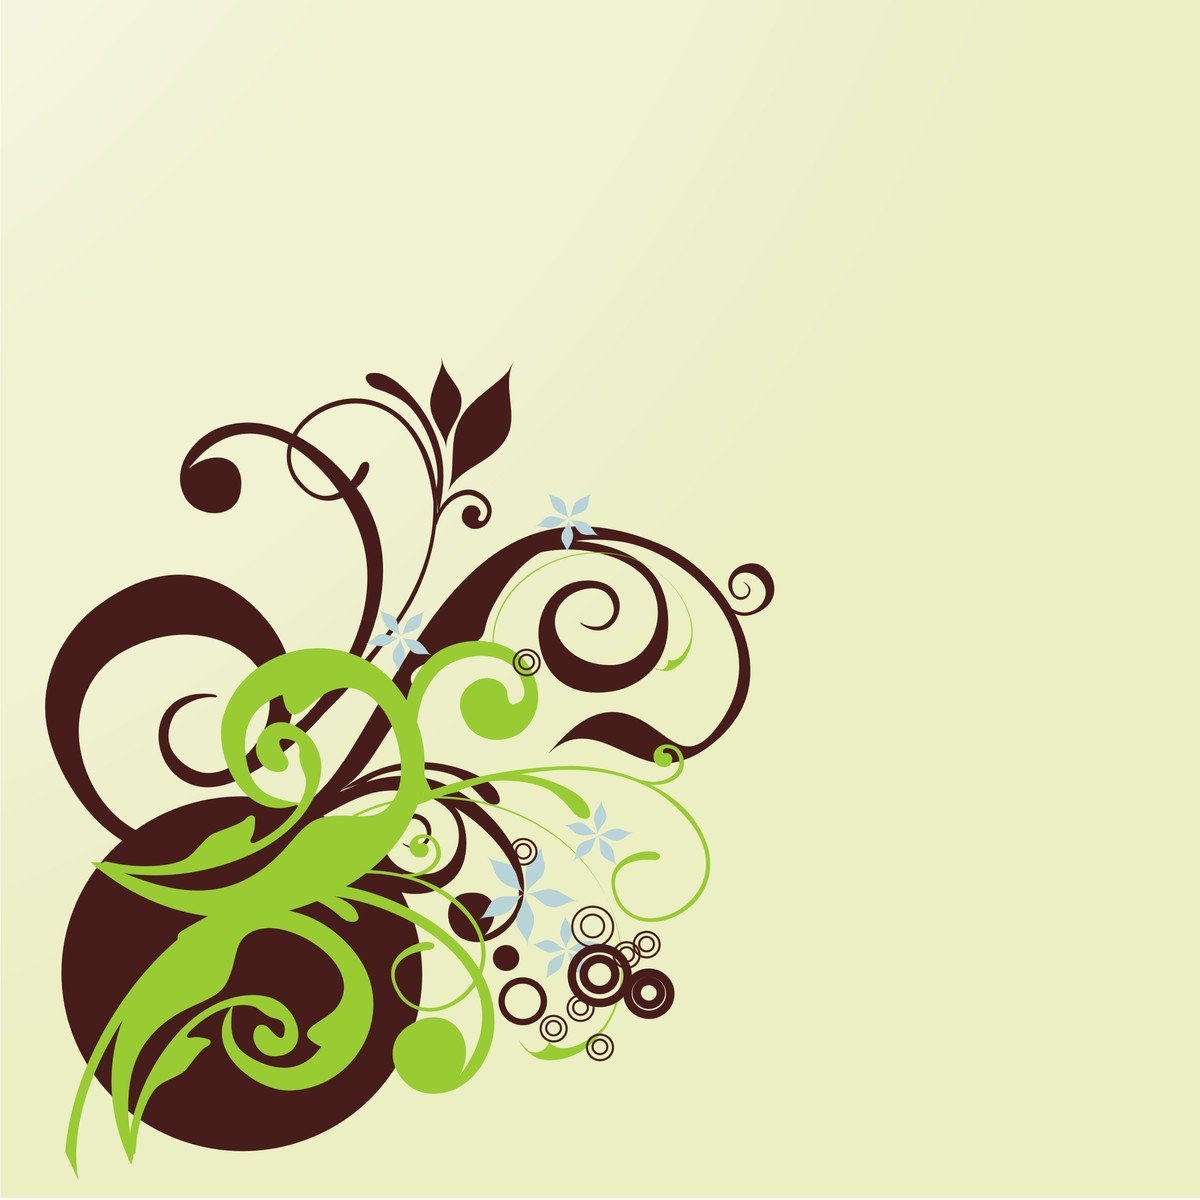 green and brown flower background with floral designs